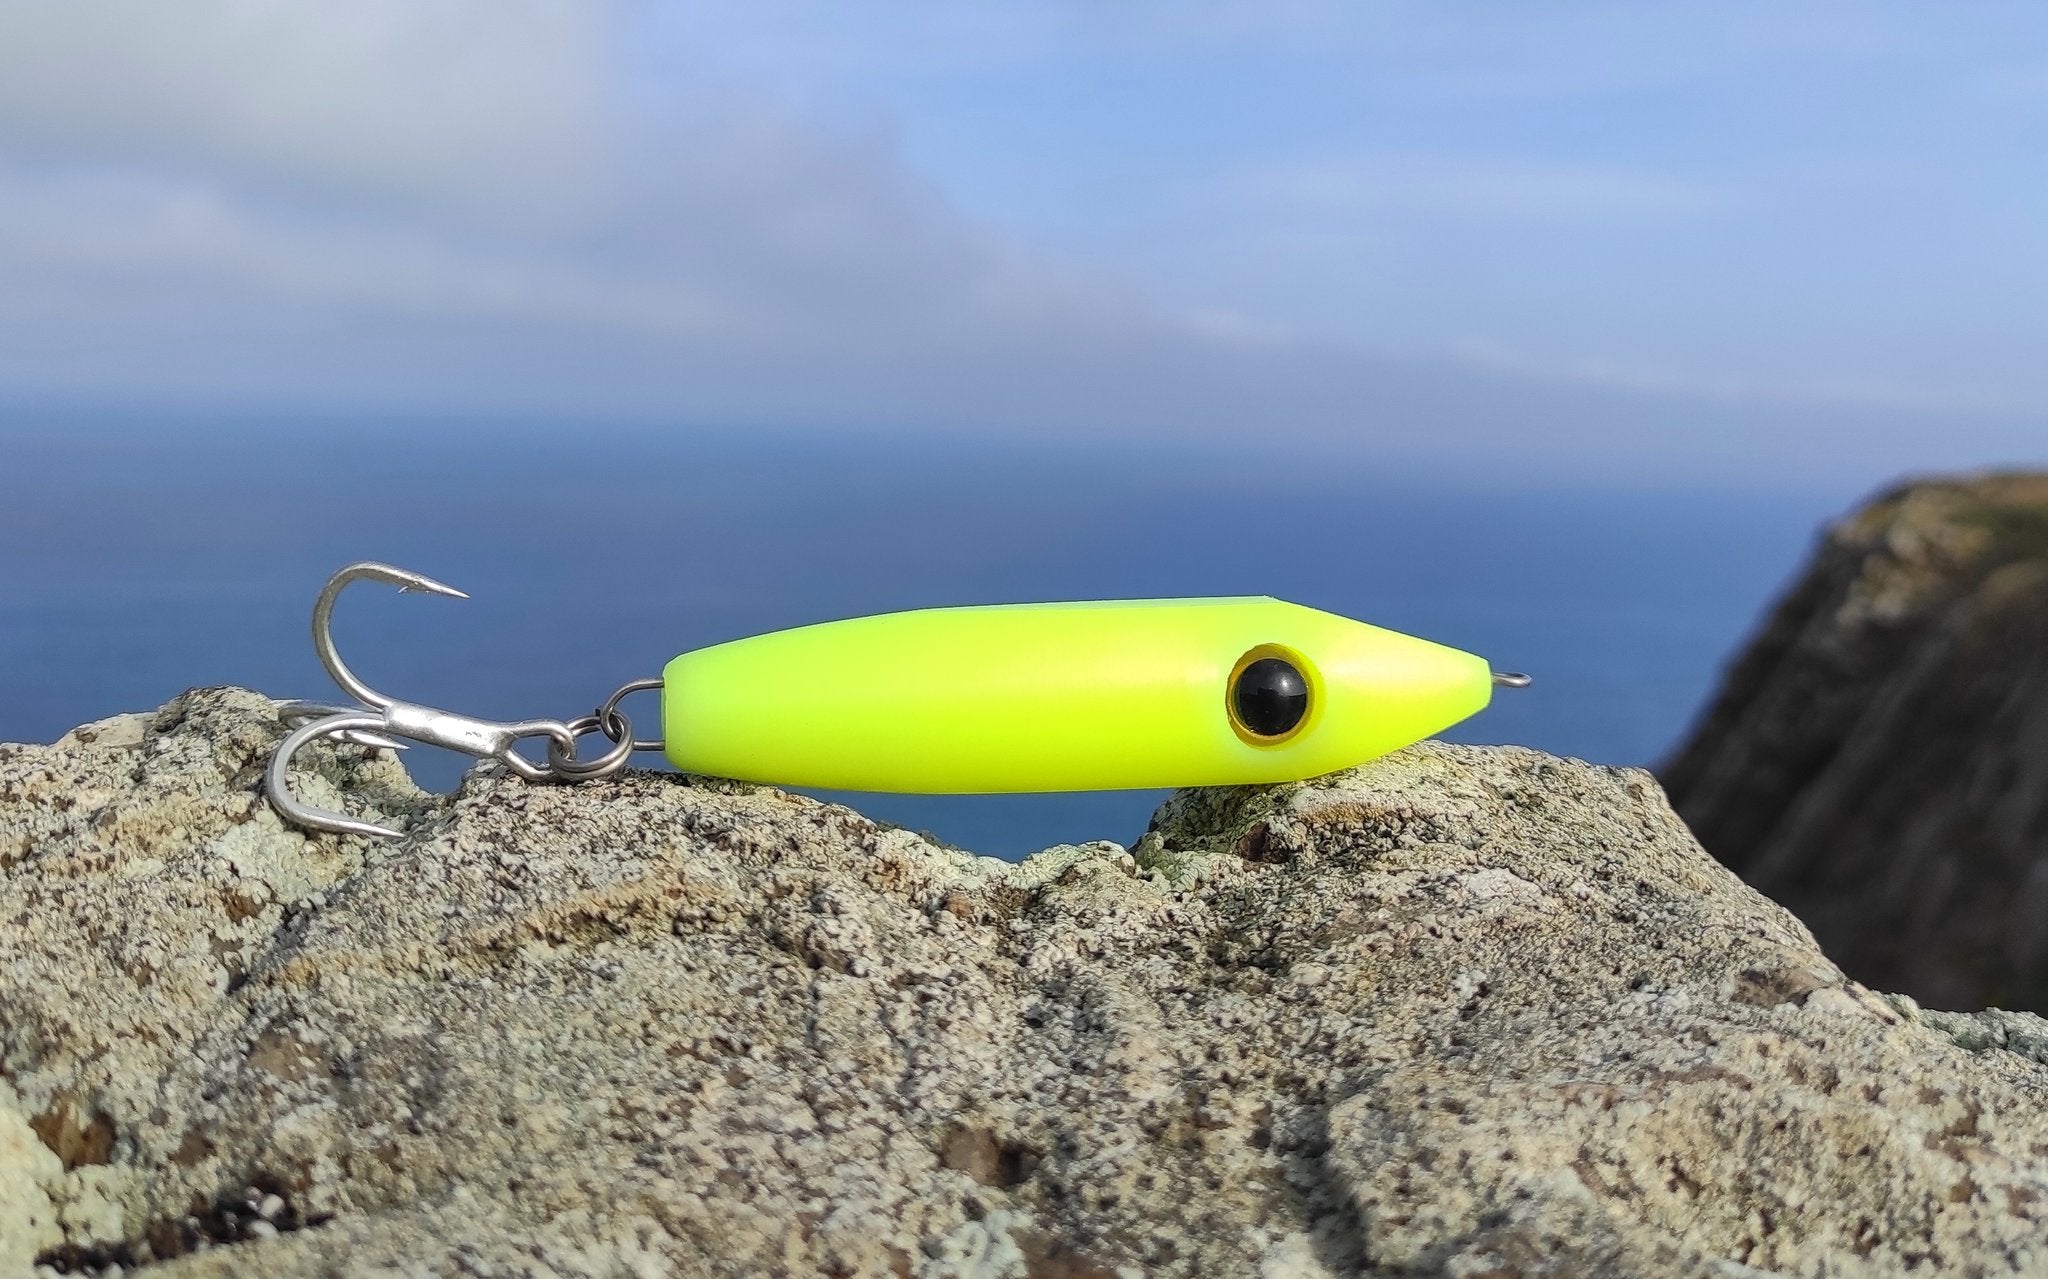 Samson Enticer Minnow Topwater Sub Fishing Lure High Visibility Yellow 15g